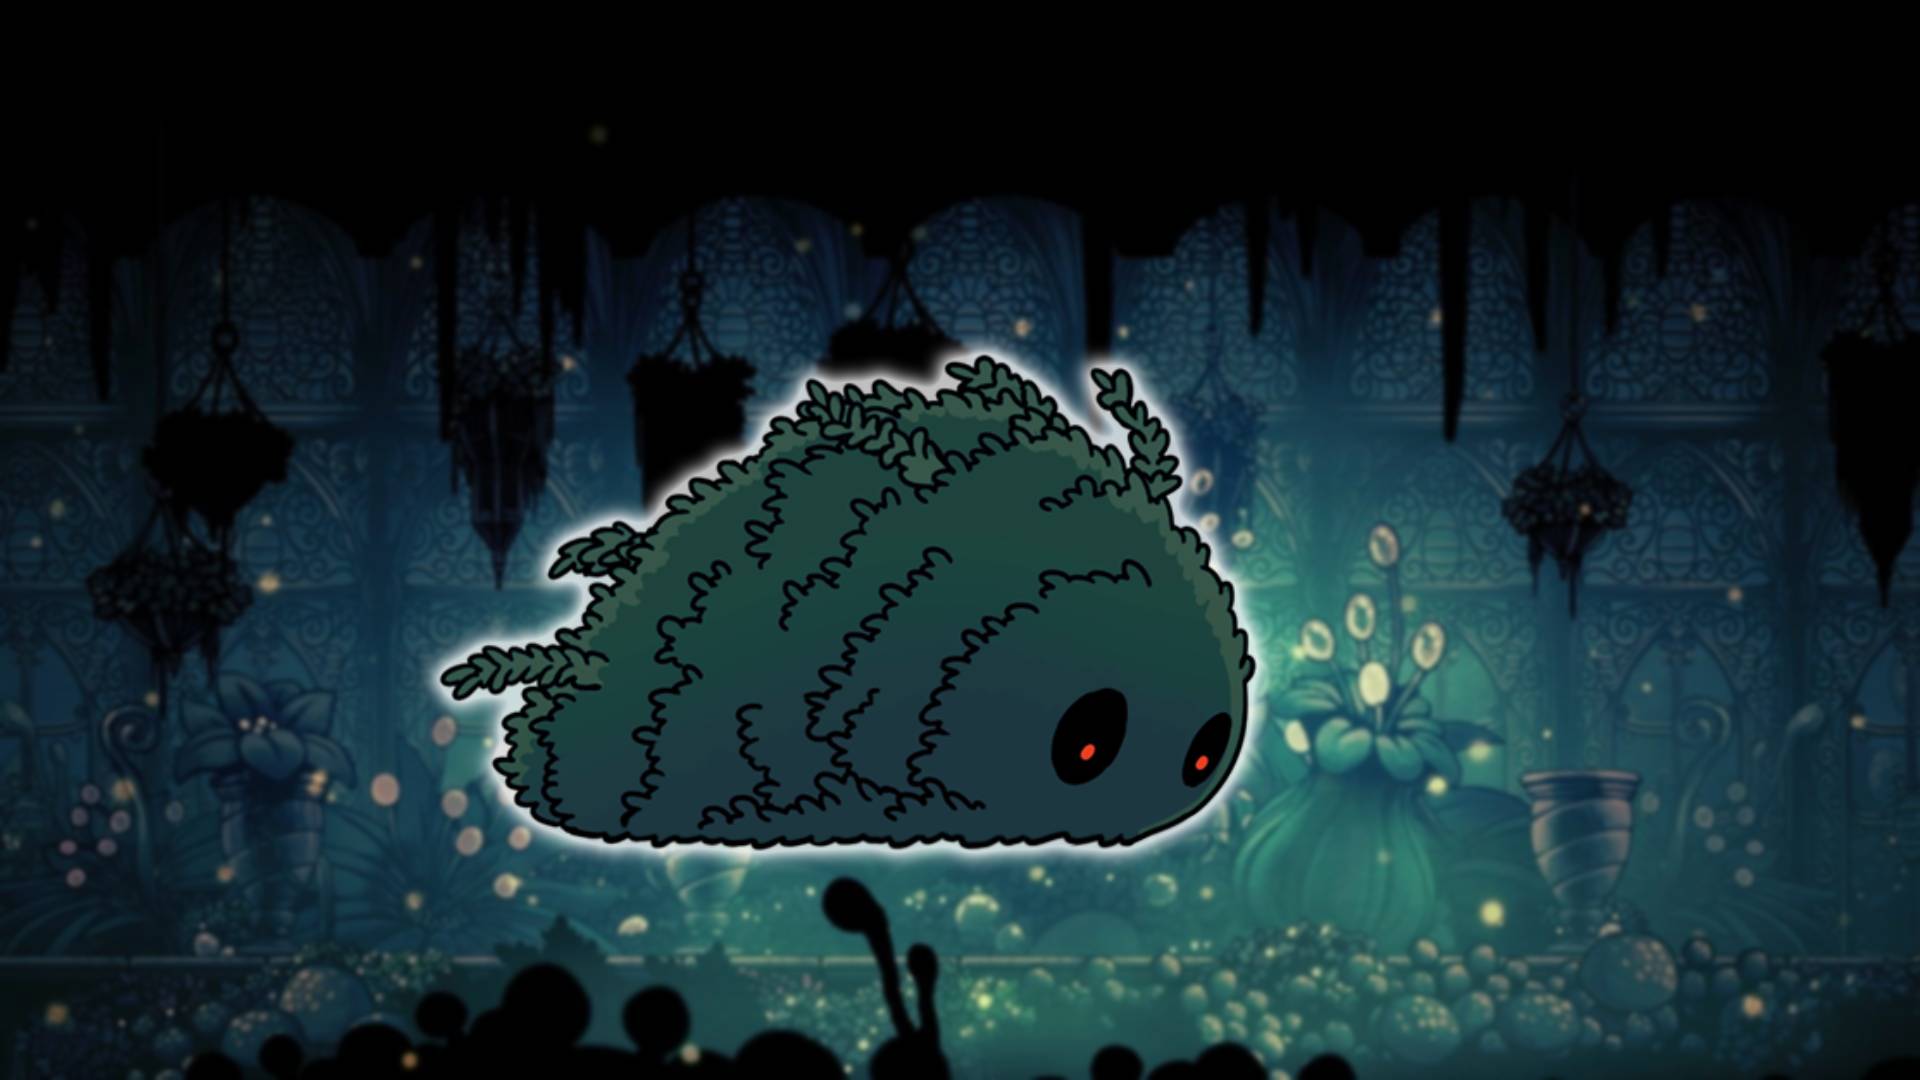 Massive Moth Charger - the Hollow Knight boss, is visible against a mossy green background area from Hollow Knight 